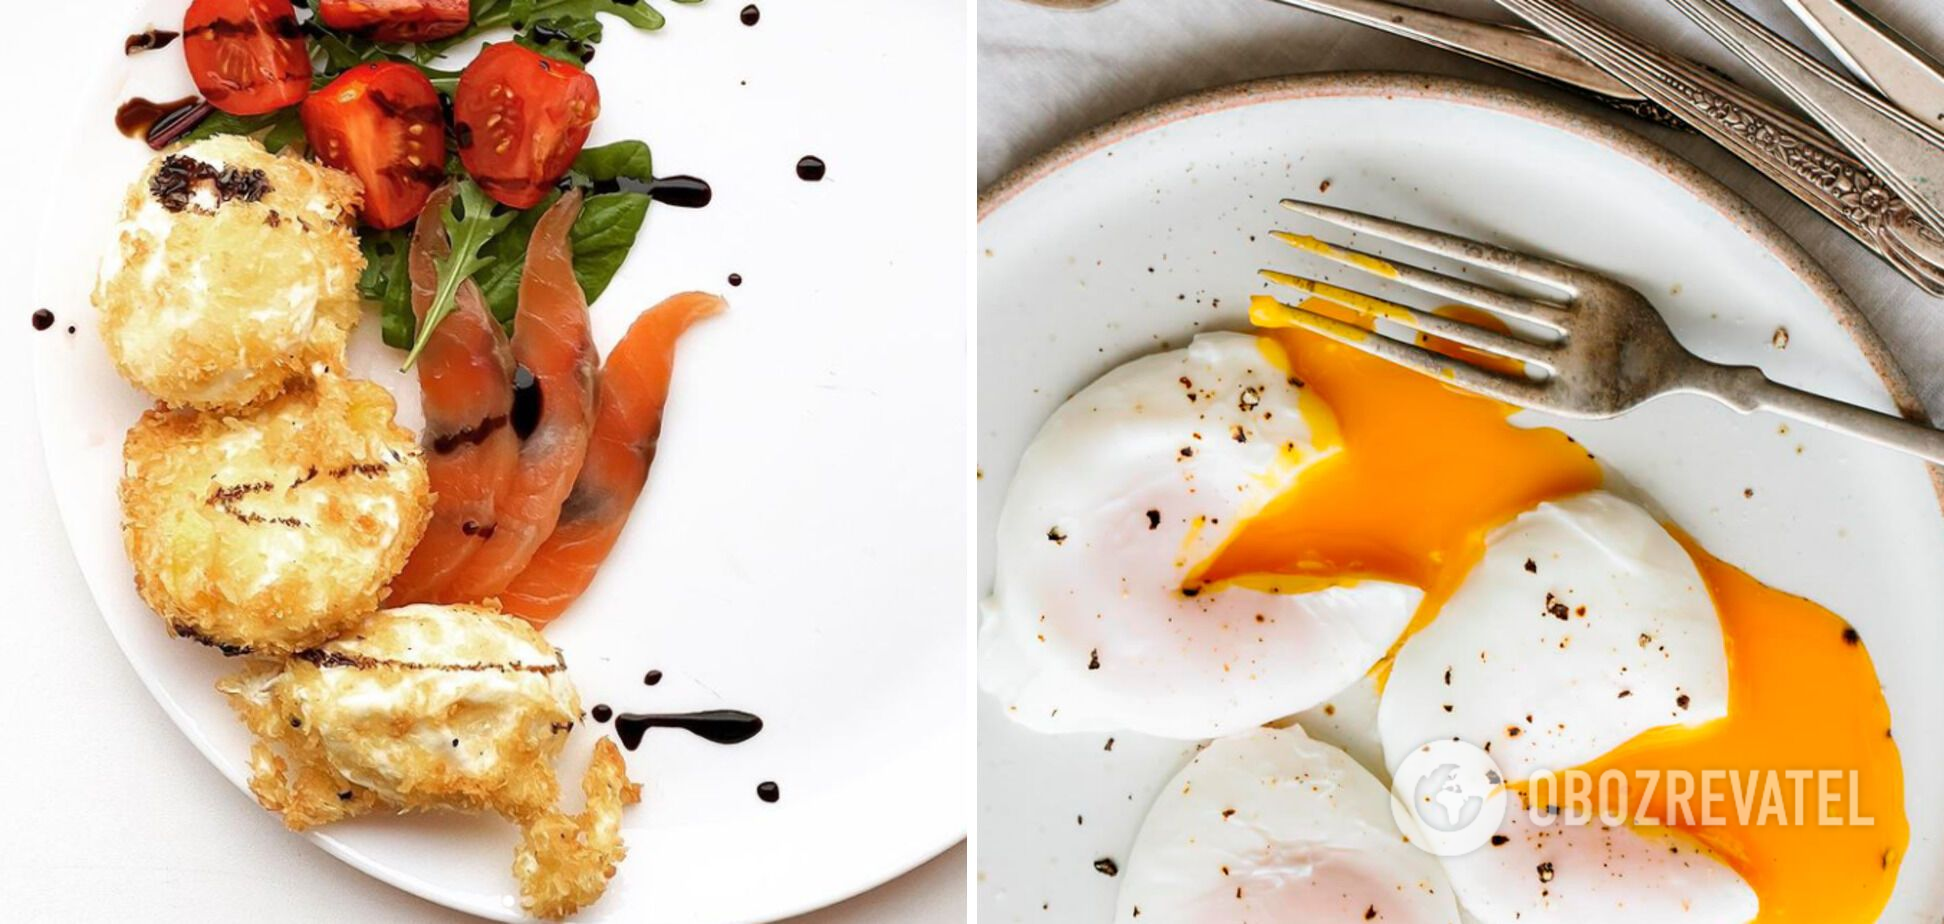 What to cook with eggs for breakfast